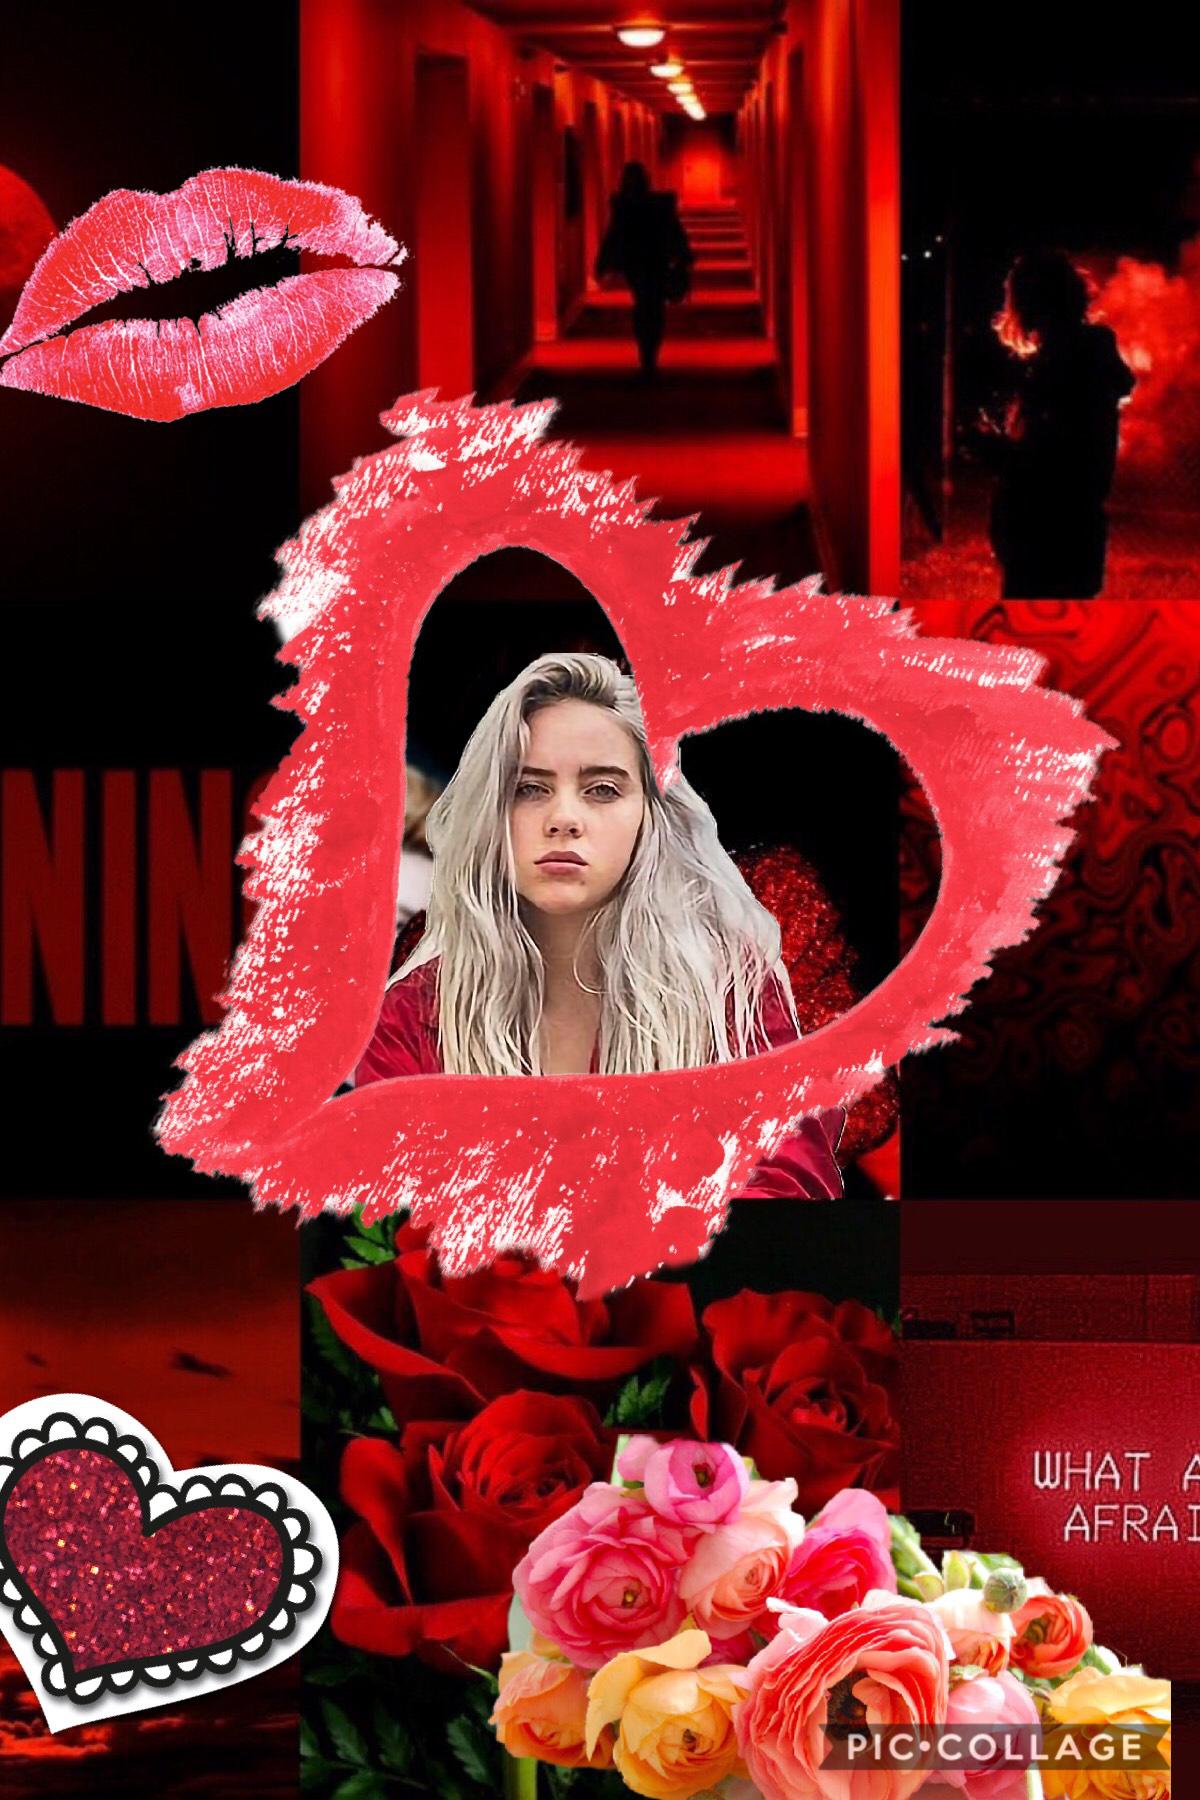 Tap💋
This is a billie eilish collage please enjoy and follow me